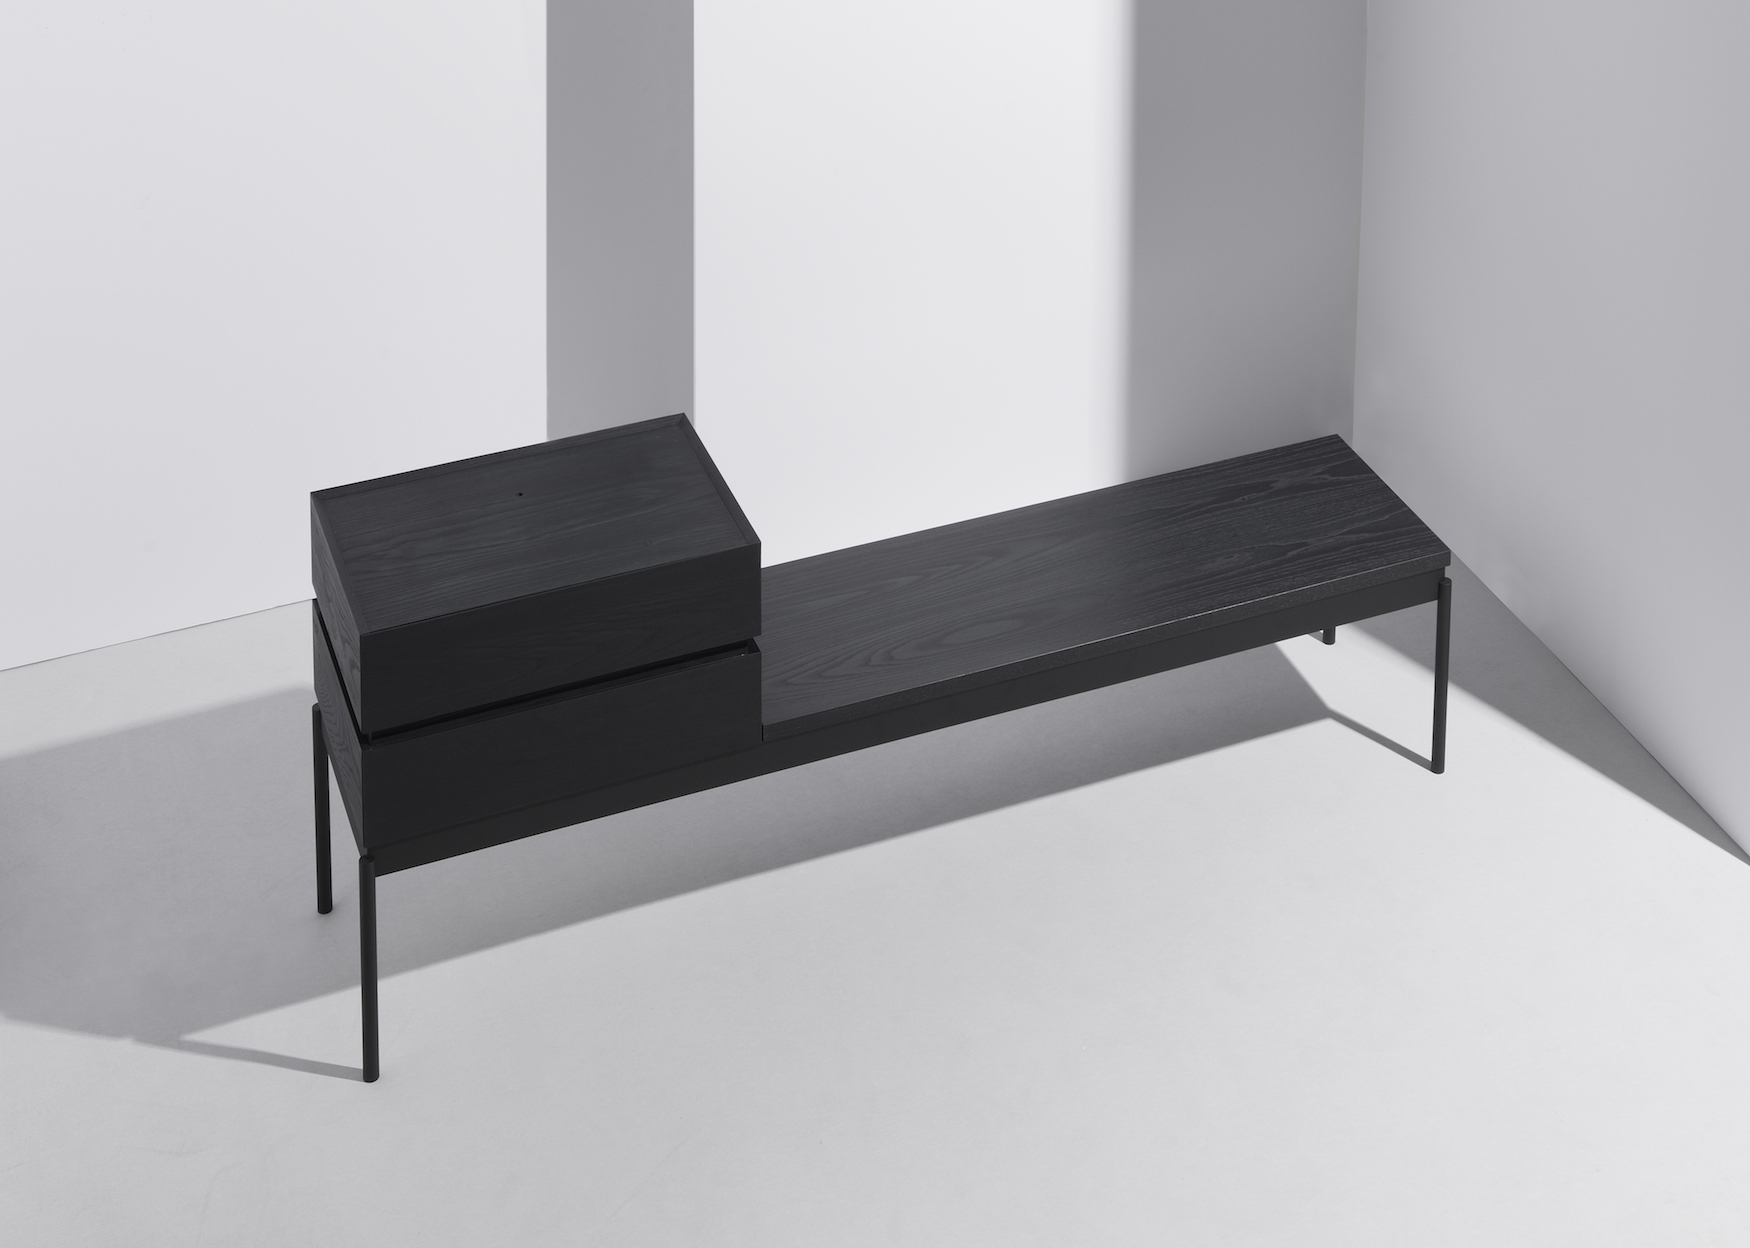 Recess Collection by Earnest Studio for Furnishing Utopia